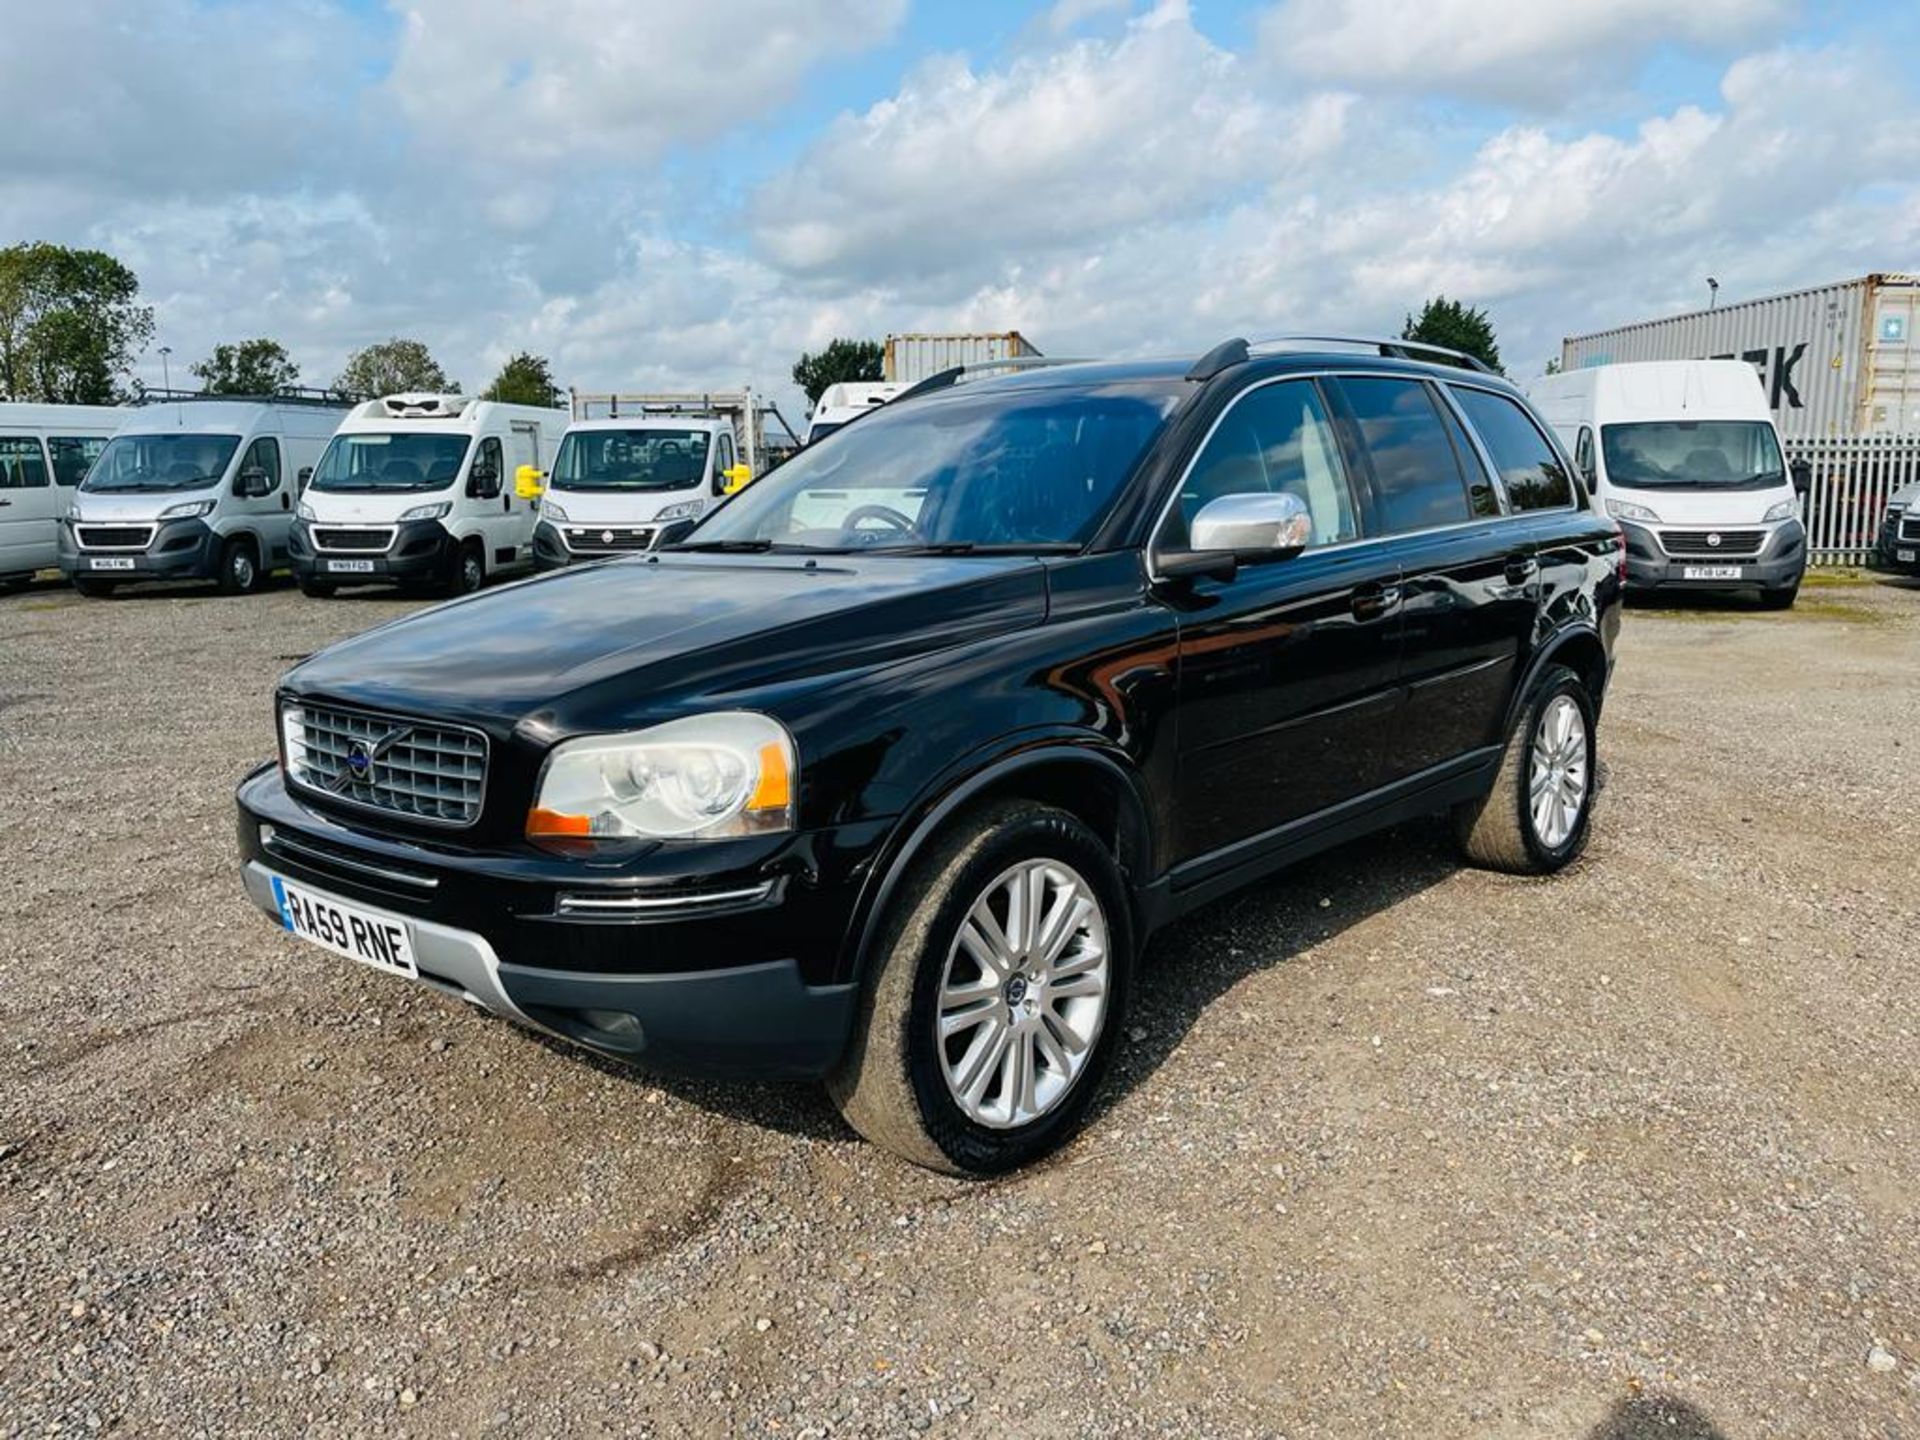 ** ON SALE ** Volvo XC90 2.4 D5 185 Executive G/T Estate 2009 '59 plate' - Climate Control - No Vat - Image 13 of 30